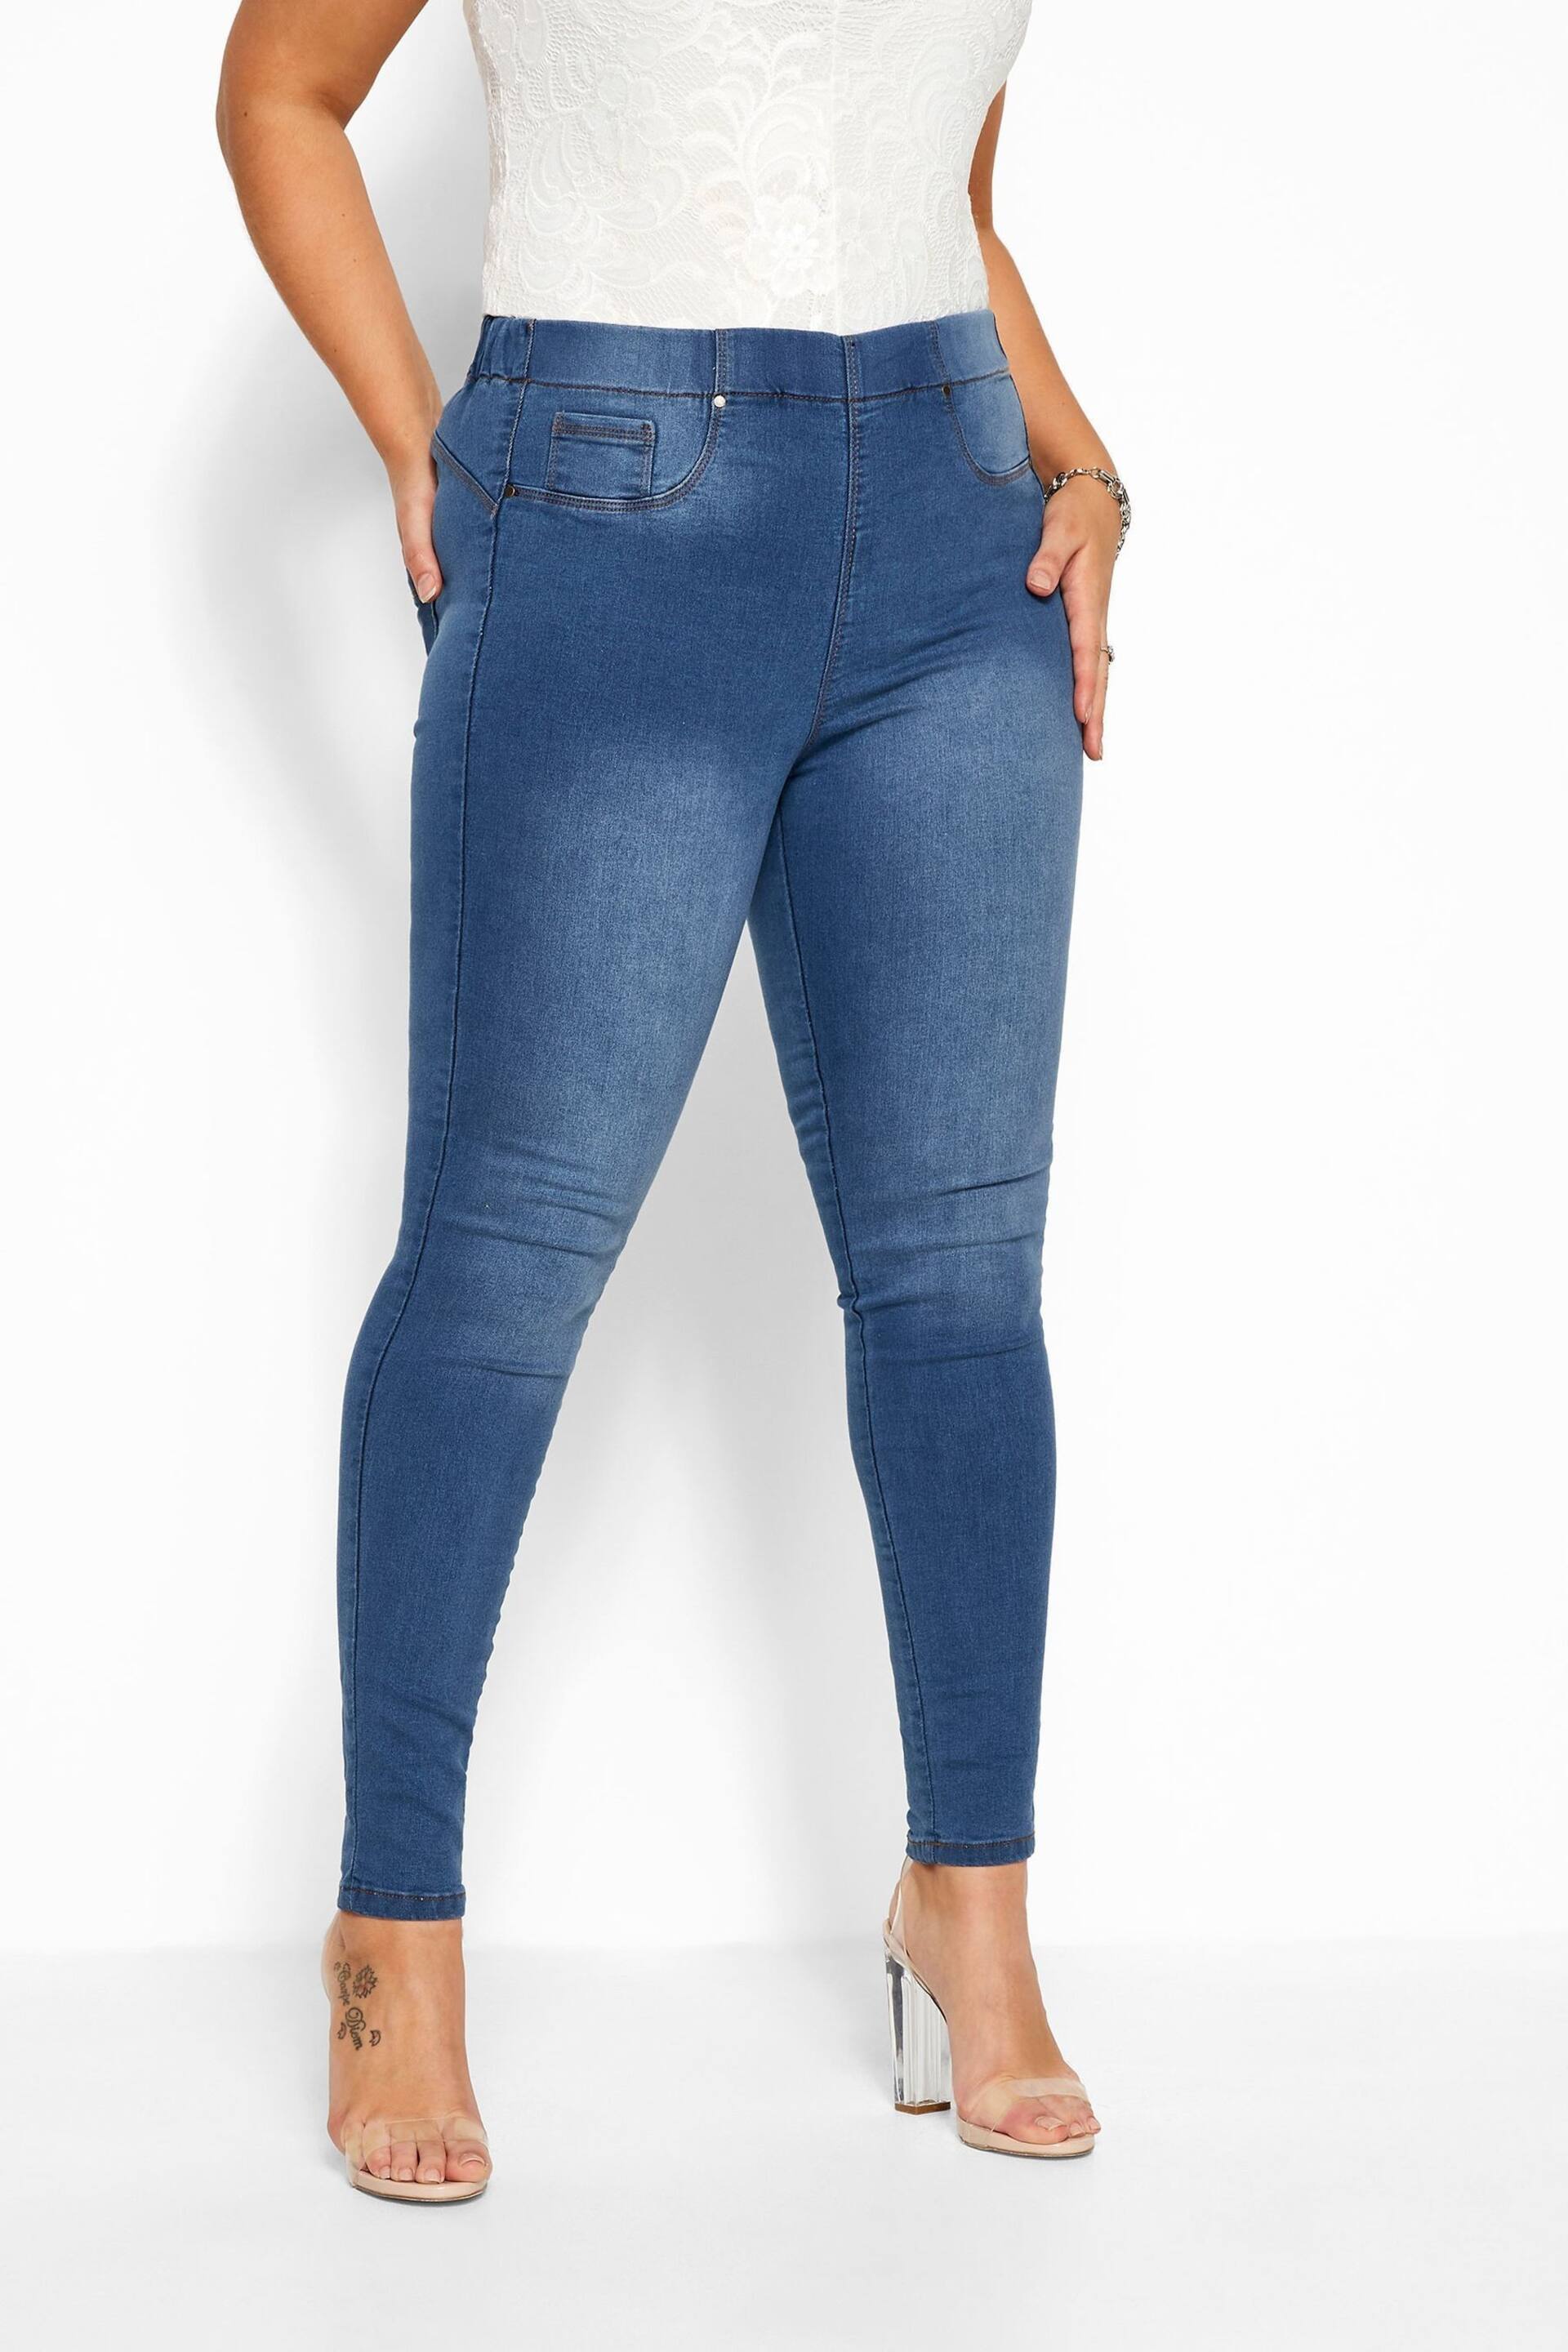 Yours Curve Mid Blue Pull On Bum Shaper Lola Jeggings - Image 1 of 3